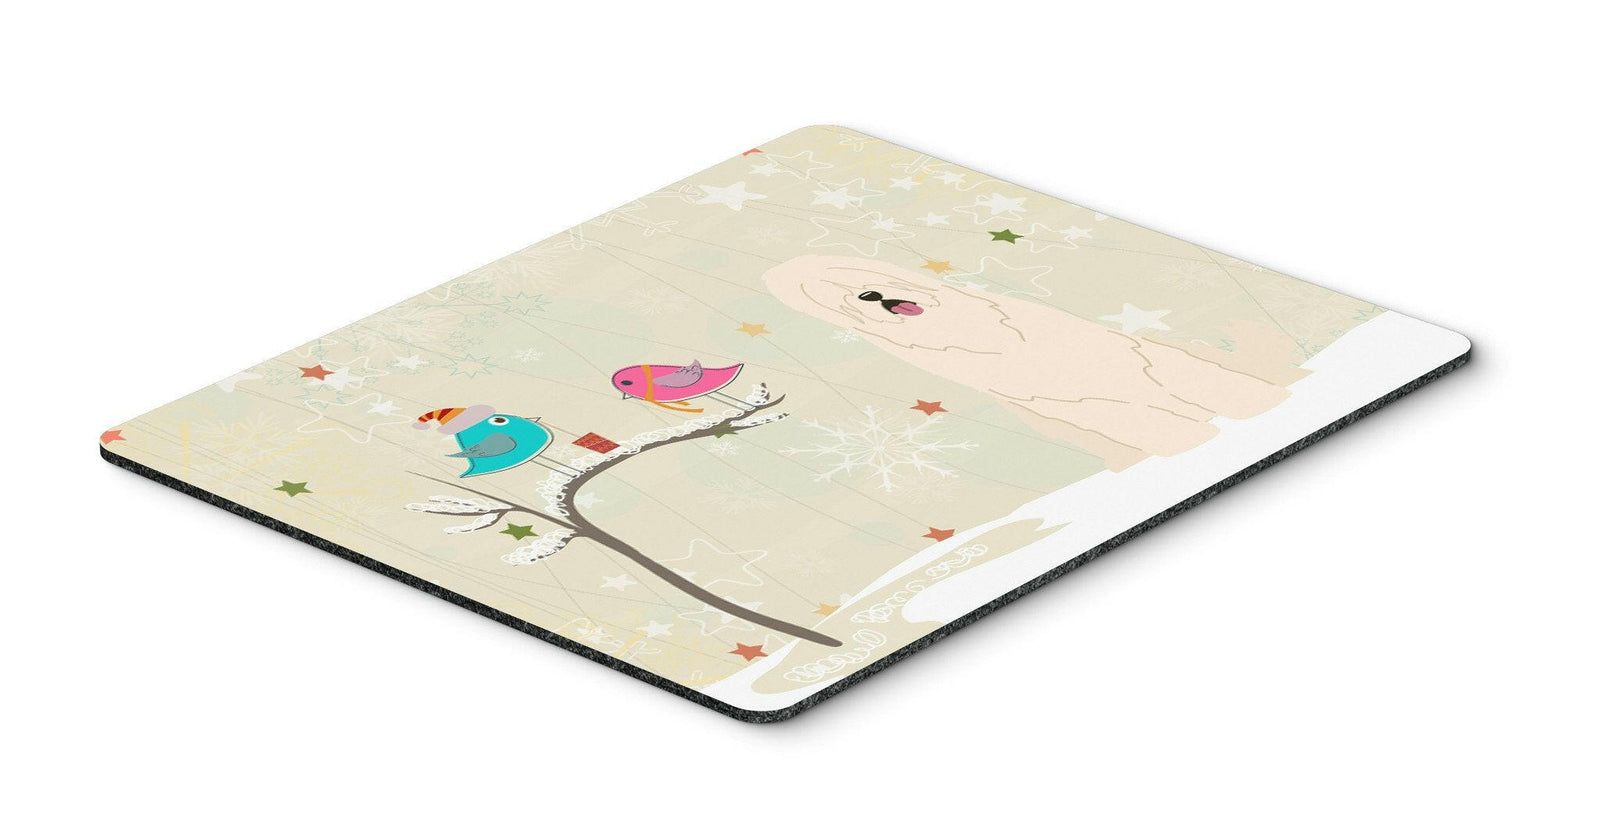 Christmas Presents between Friends South Russian Sheepdog Mouse Pad, Hot Pad or Trivet BB2496MP by Caroline's Treasures